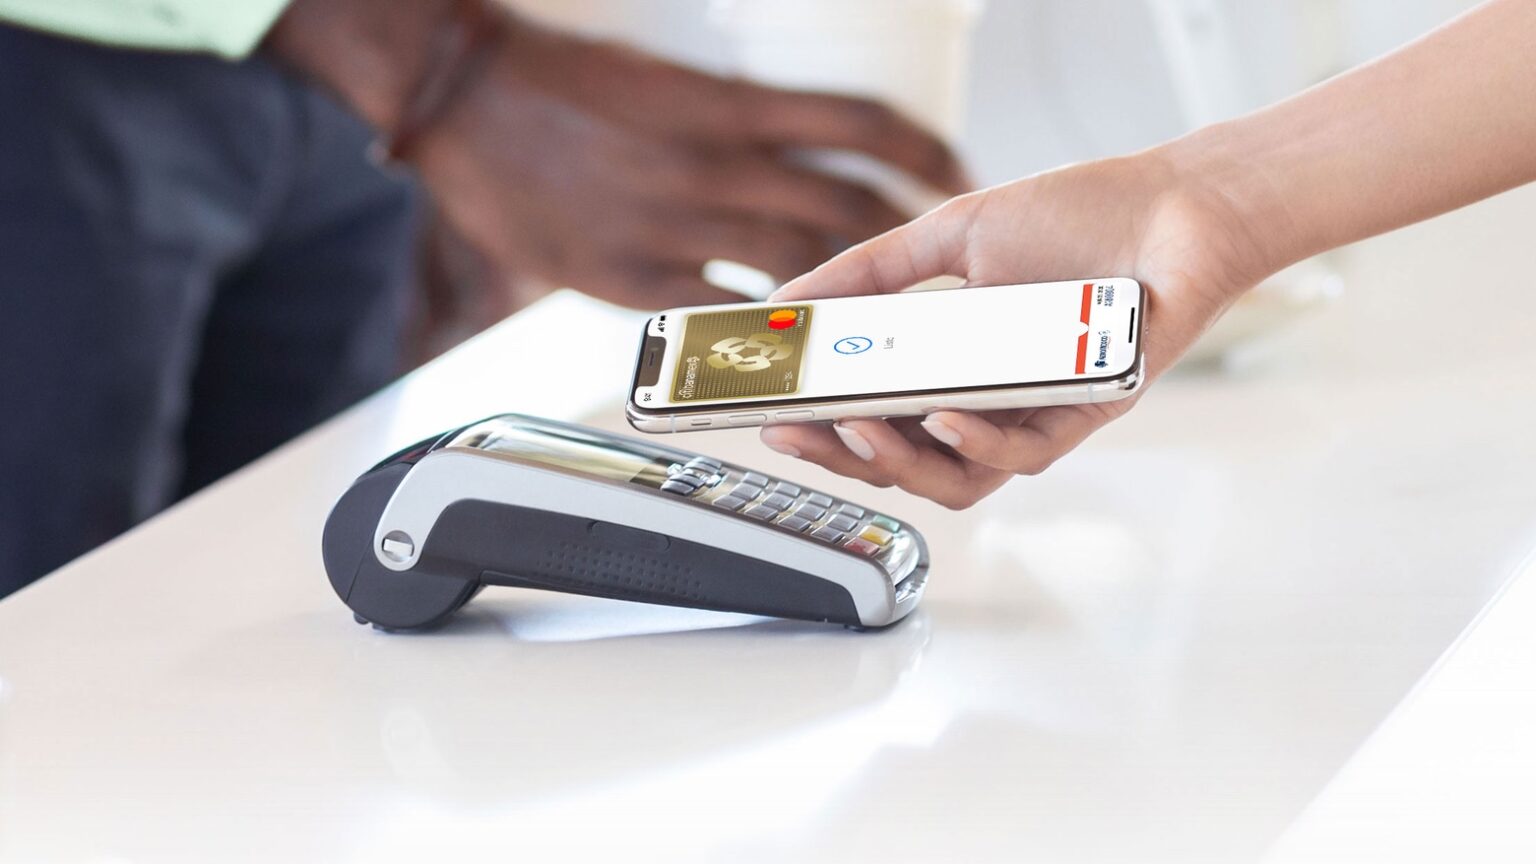 Apple Pay heads south of the border, down Mexico way